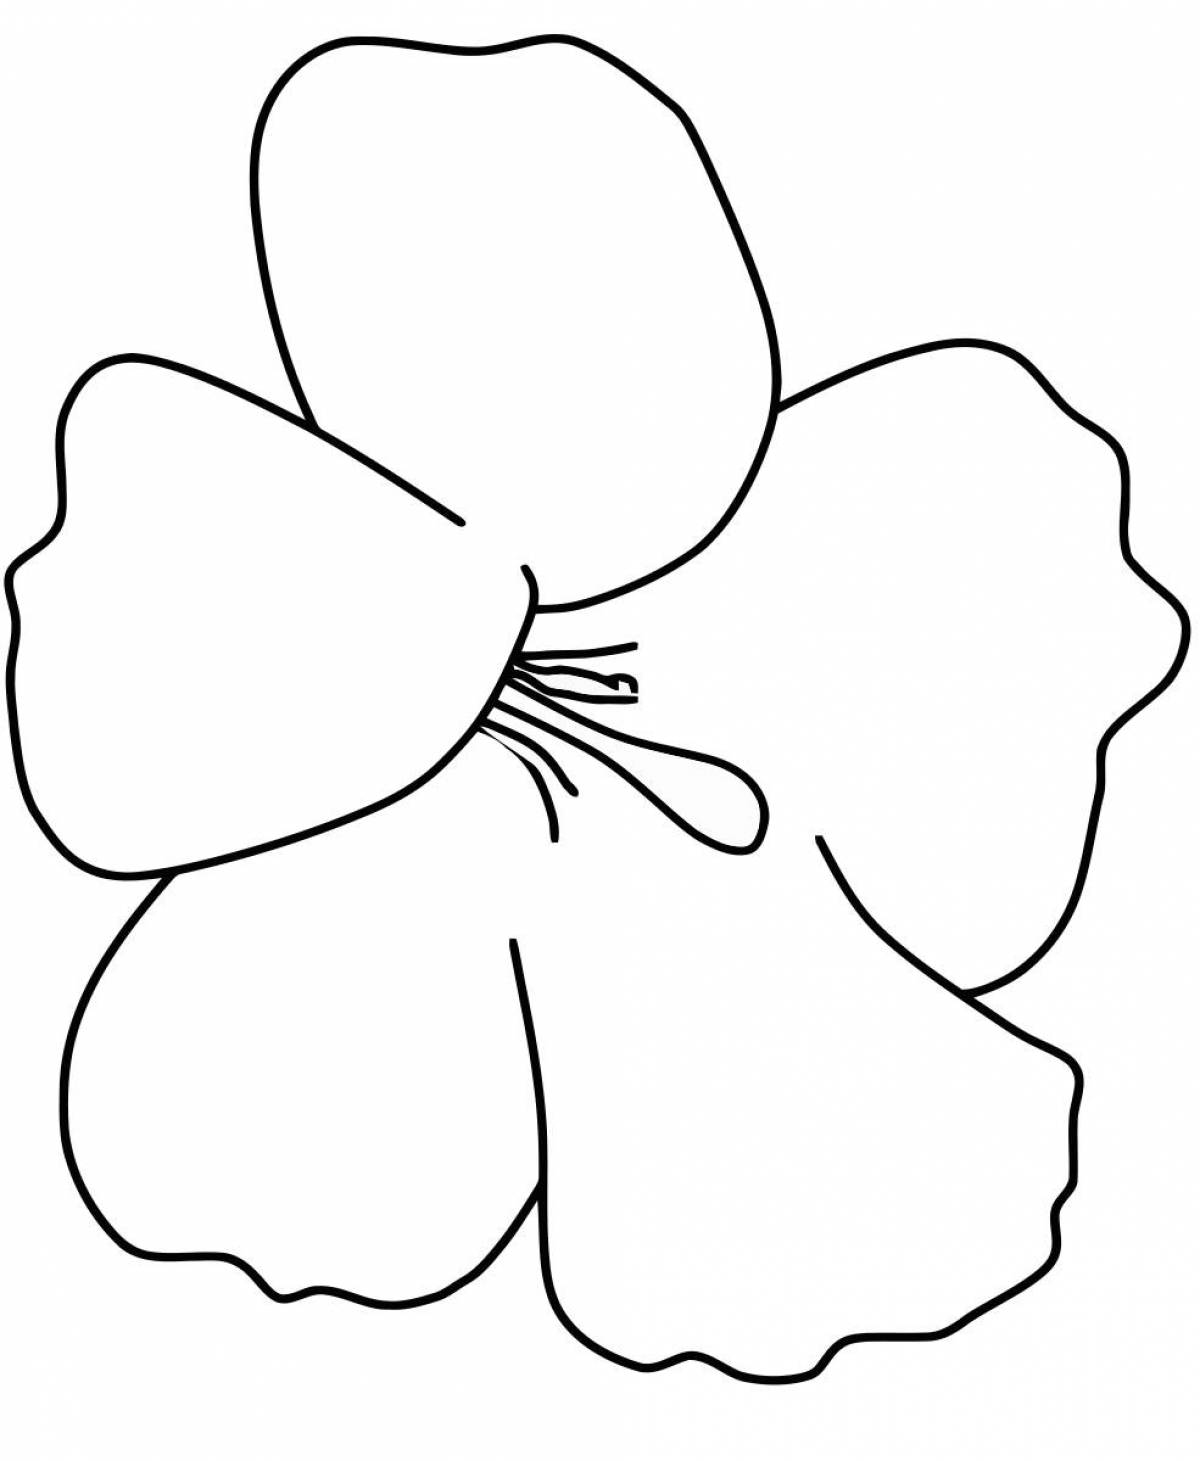 Large flowers coloring page